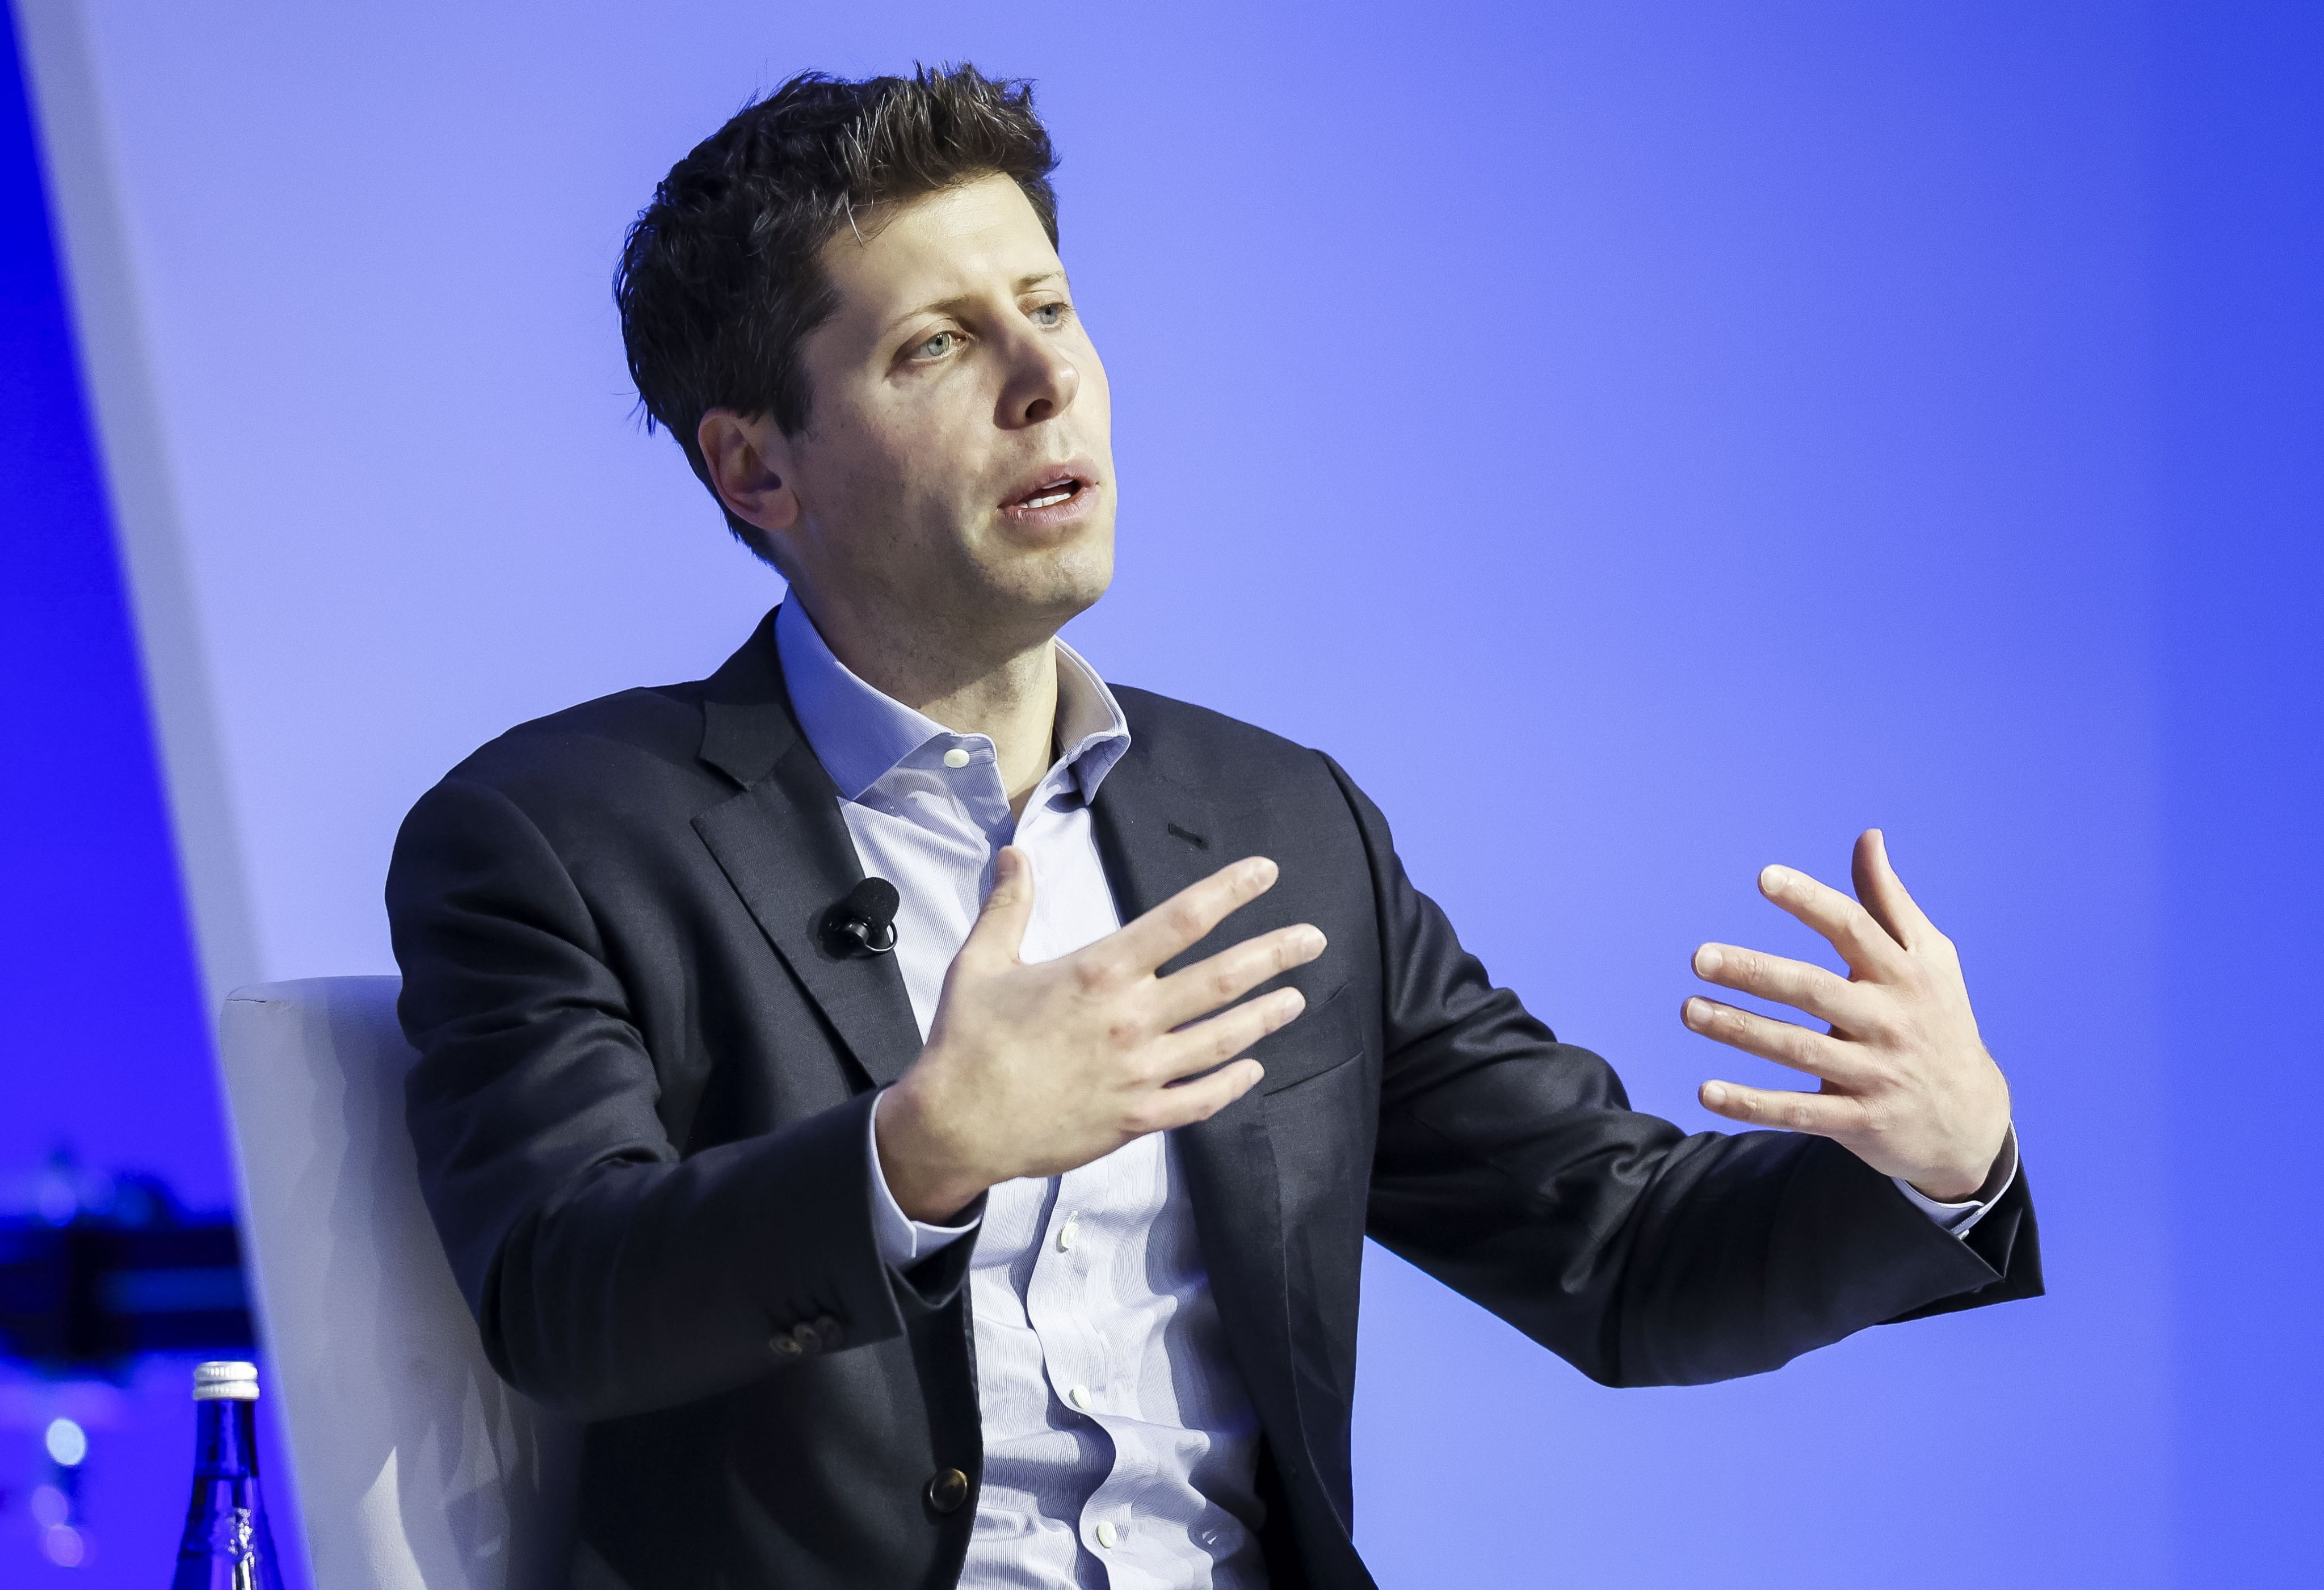 Investors in ChatGPT creator OpenAI, including its biggest backer Microsoft Corp, are discussing damage control, including possibly pushing the start-up’s board to restore Sam Altman as chief executive, according to sources. Photo: EPA-EFE